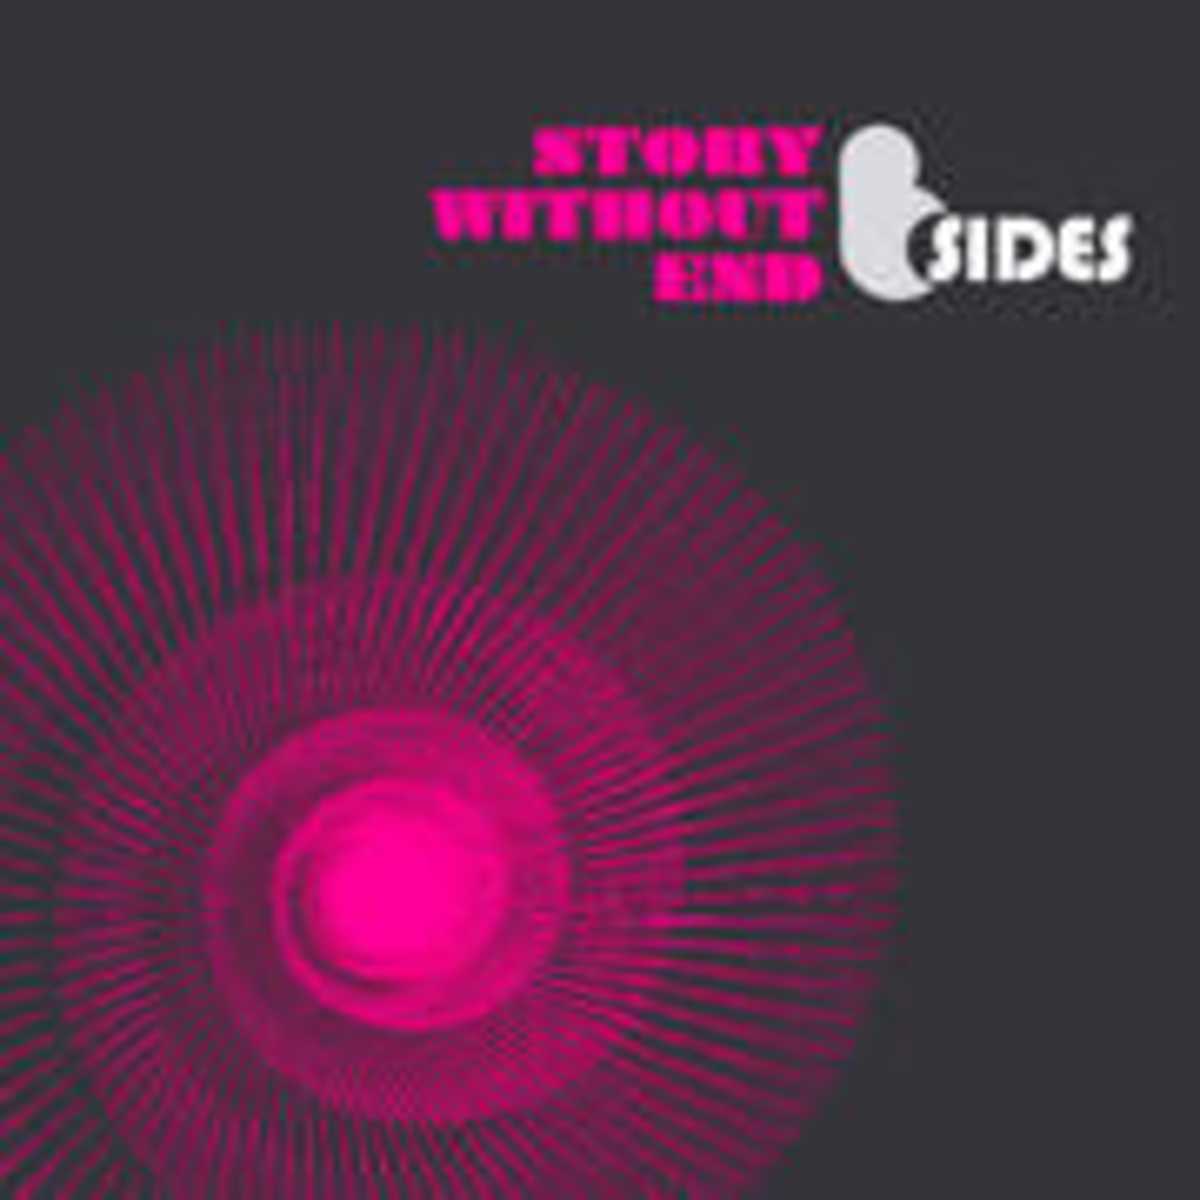 B-Sides - Story without end